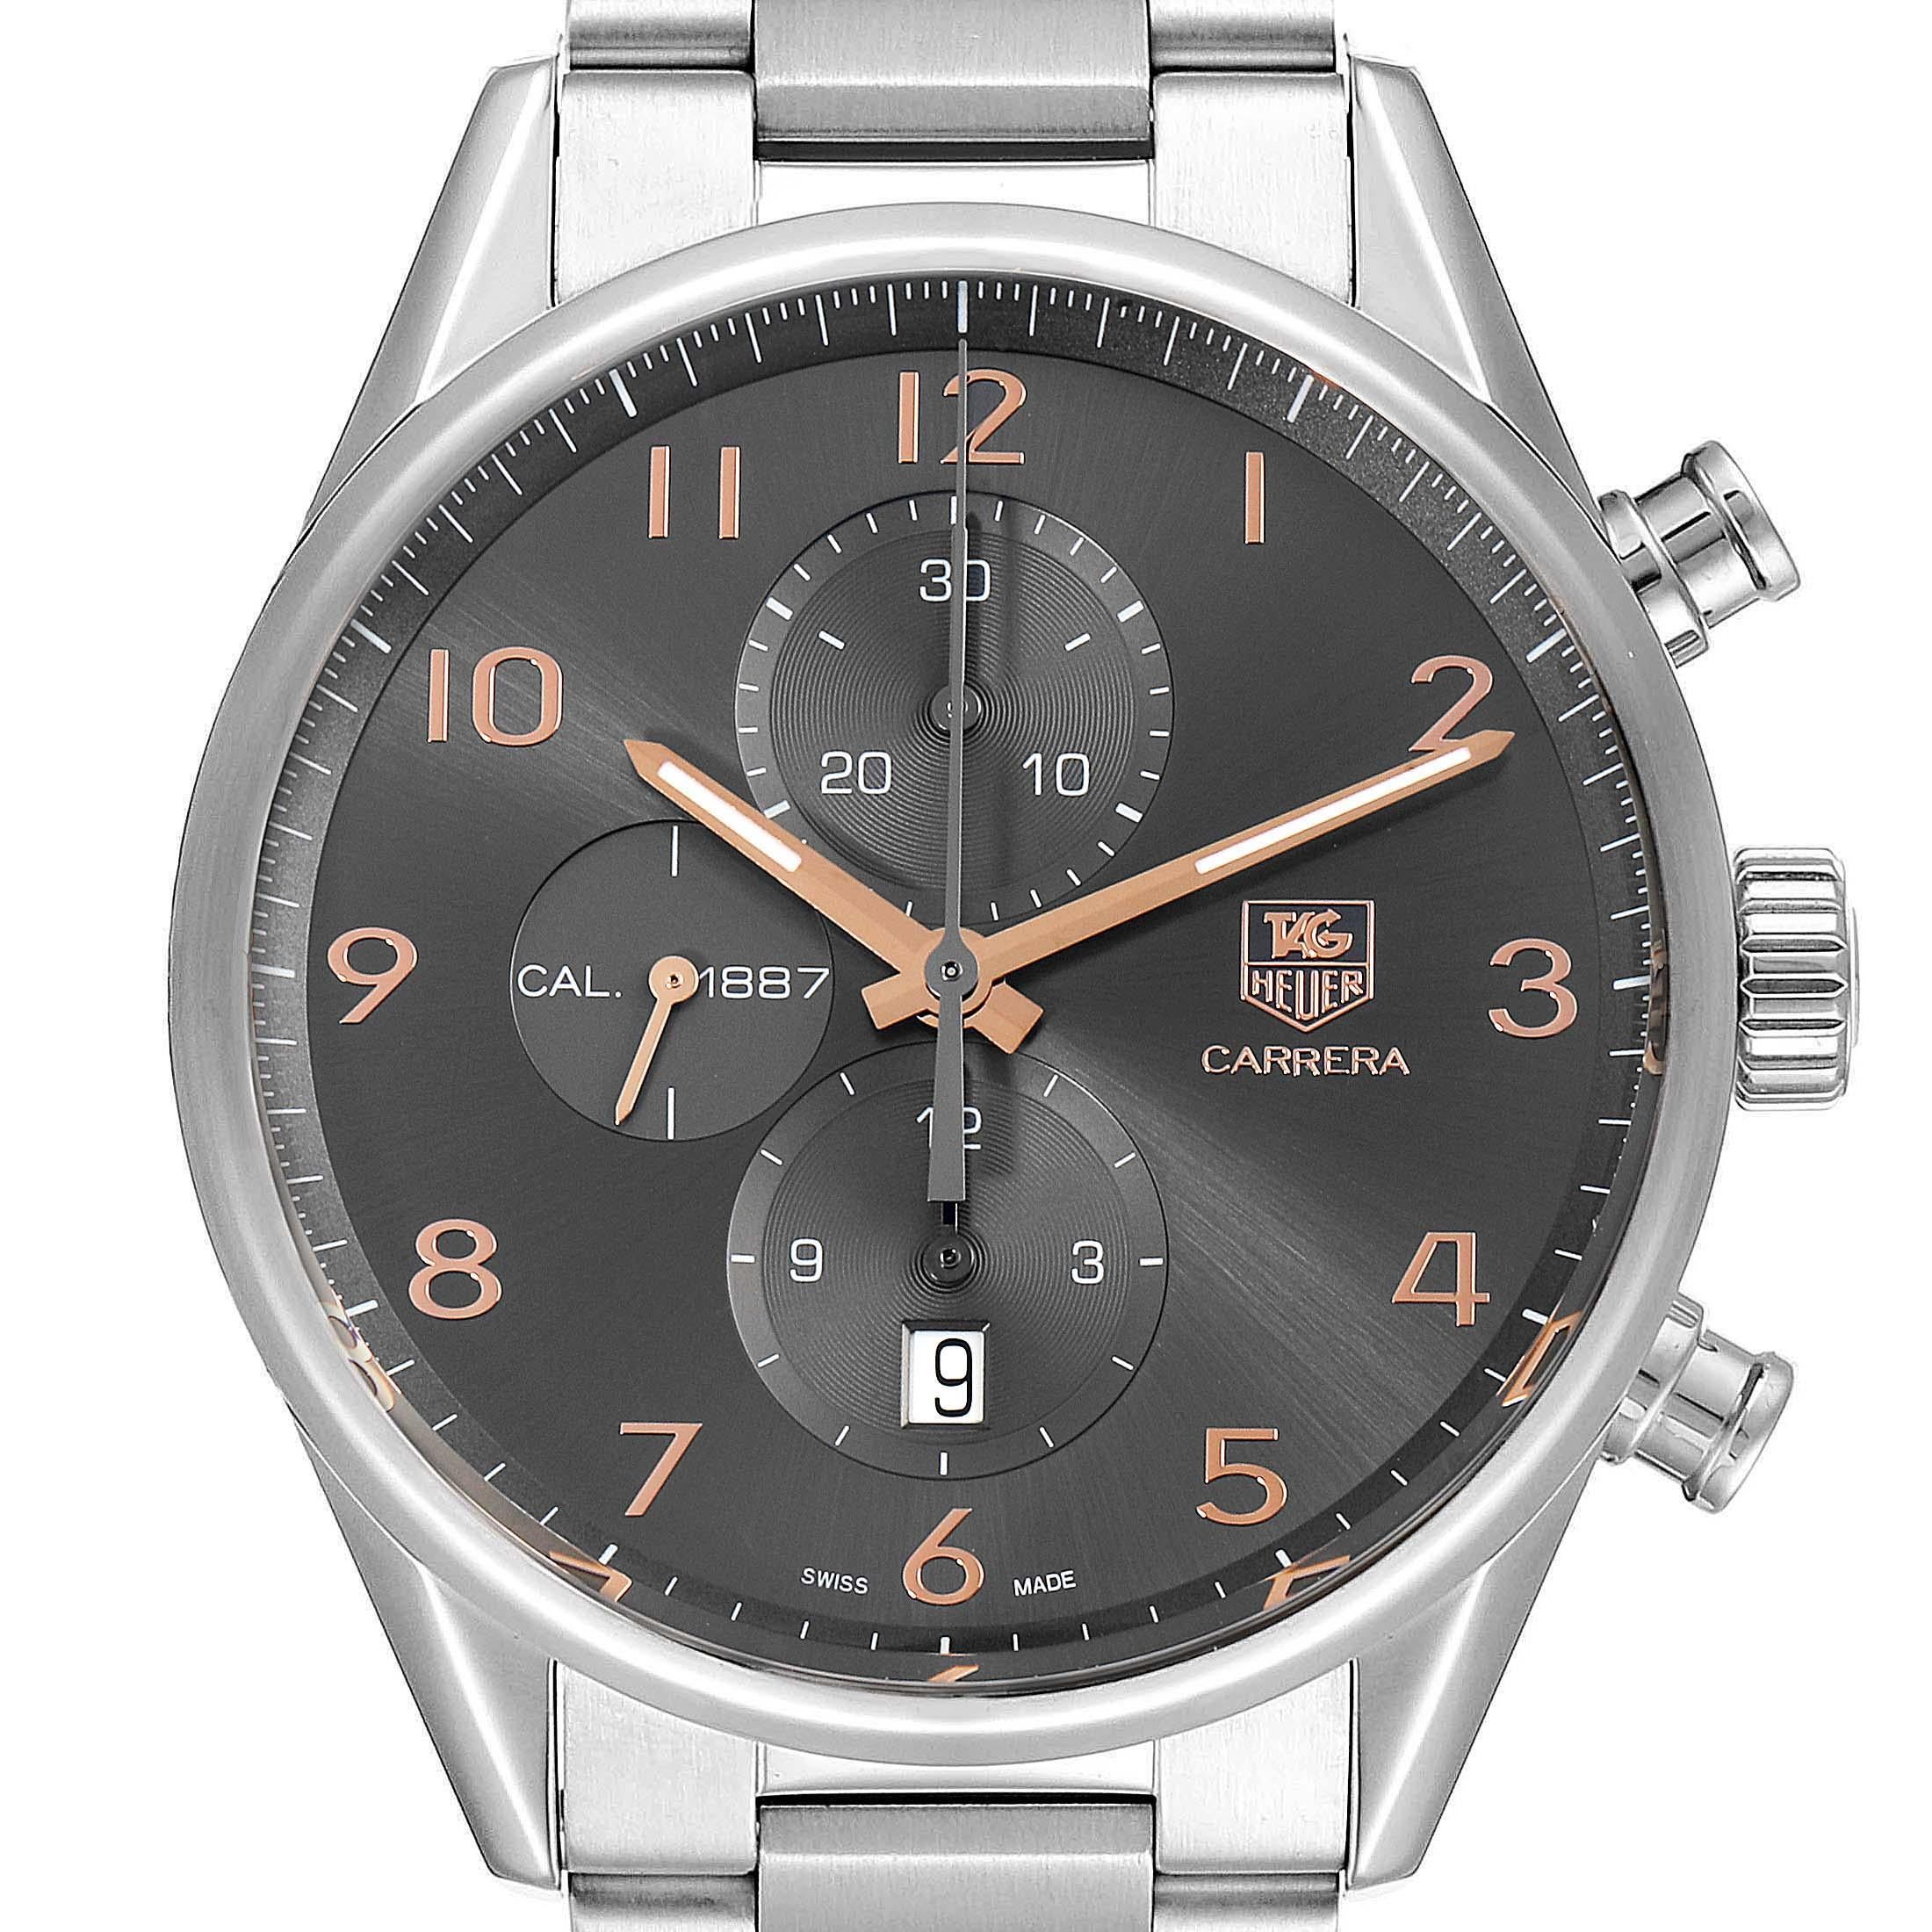 Tag Heuer Carrera 1887 Grey Dial Chronograph Mens Watch CAR2013. Automatic self-winding chronograph movement. Stainless steel case 43.0 mm. Transperent exhibition sapphire crystal case back. Stainless steel bezel. Scratch resistant sapphire crystal.